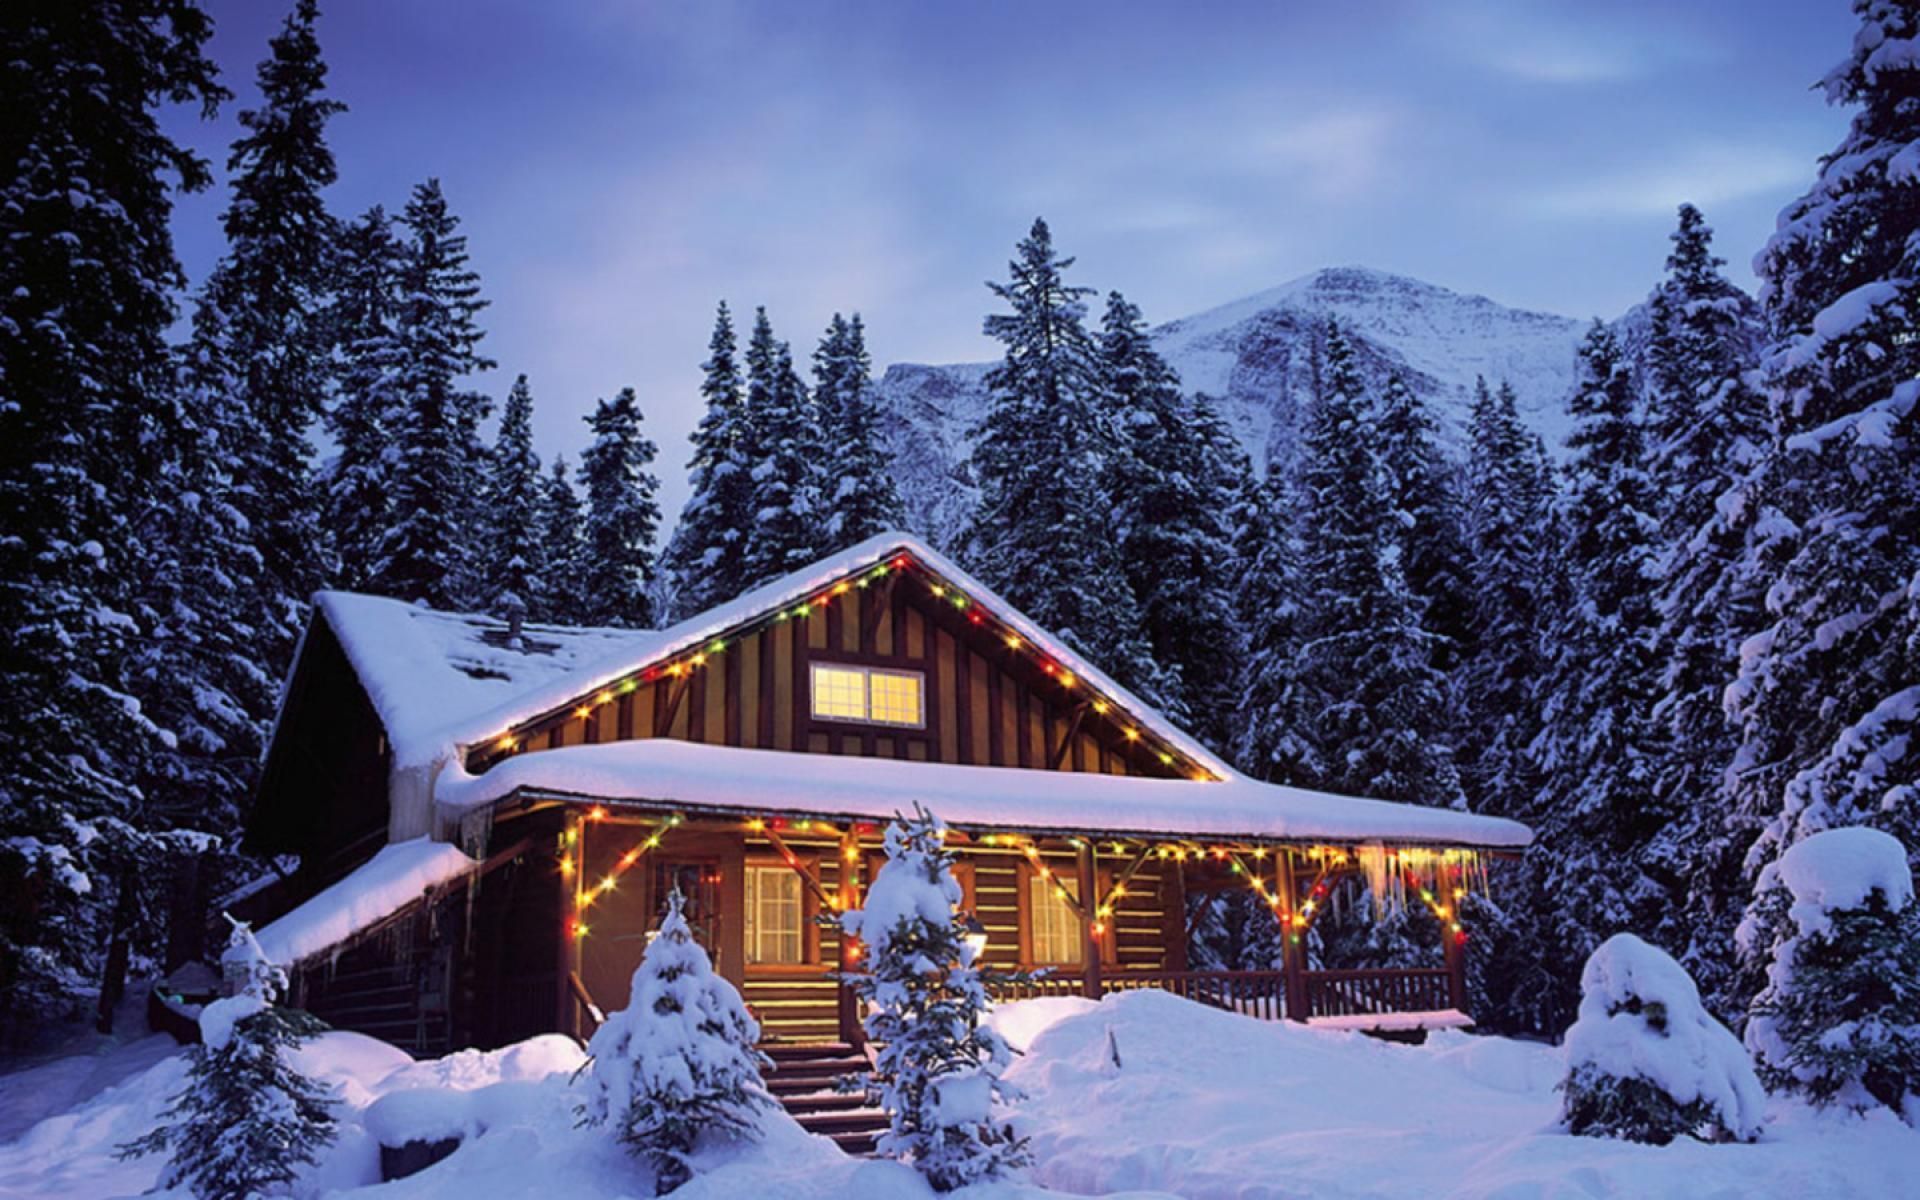 Winter Wonderland: snowy winter scenes of Christmas time. Cabins in the woods, Winter cabin, Cabin christmas